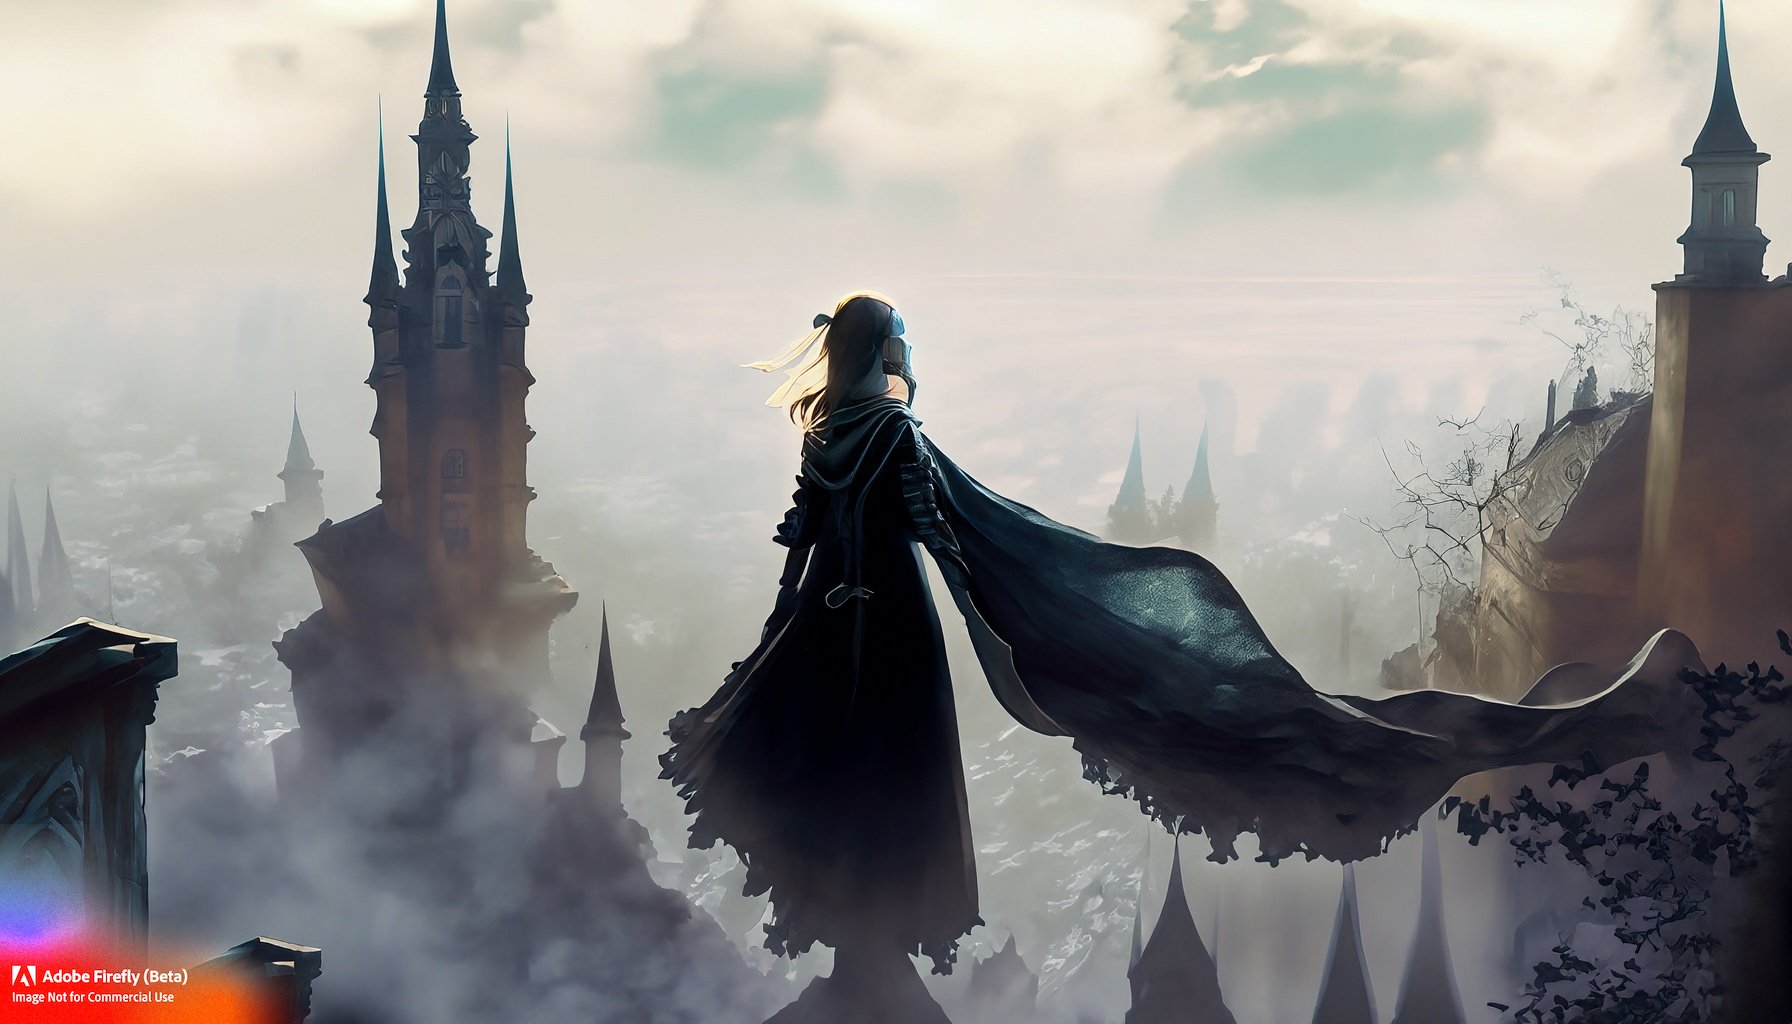 Firefly_mist+and fog, person in a dark cape made of fabric ribbons. The person is flying, there's an ancient city rooftops, coins and glass vials, a castle with many spires_art,wide_angle,fantasy_44916.jpg